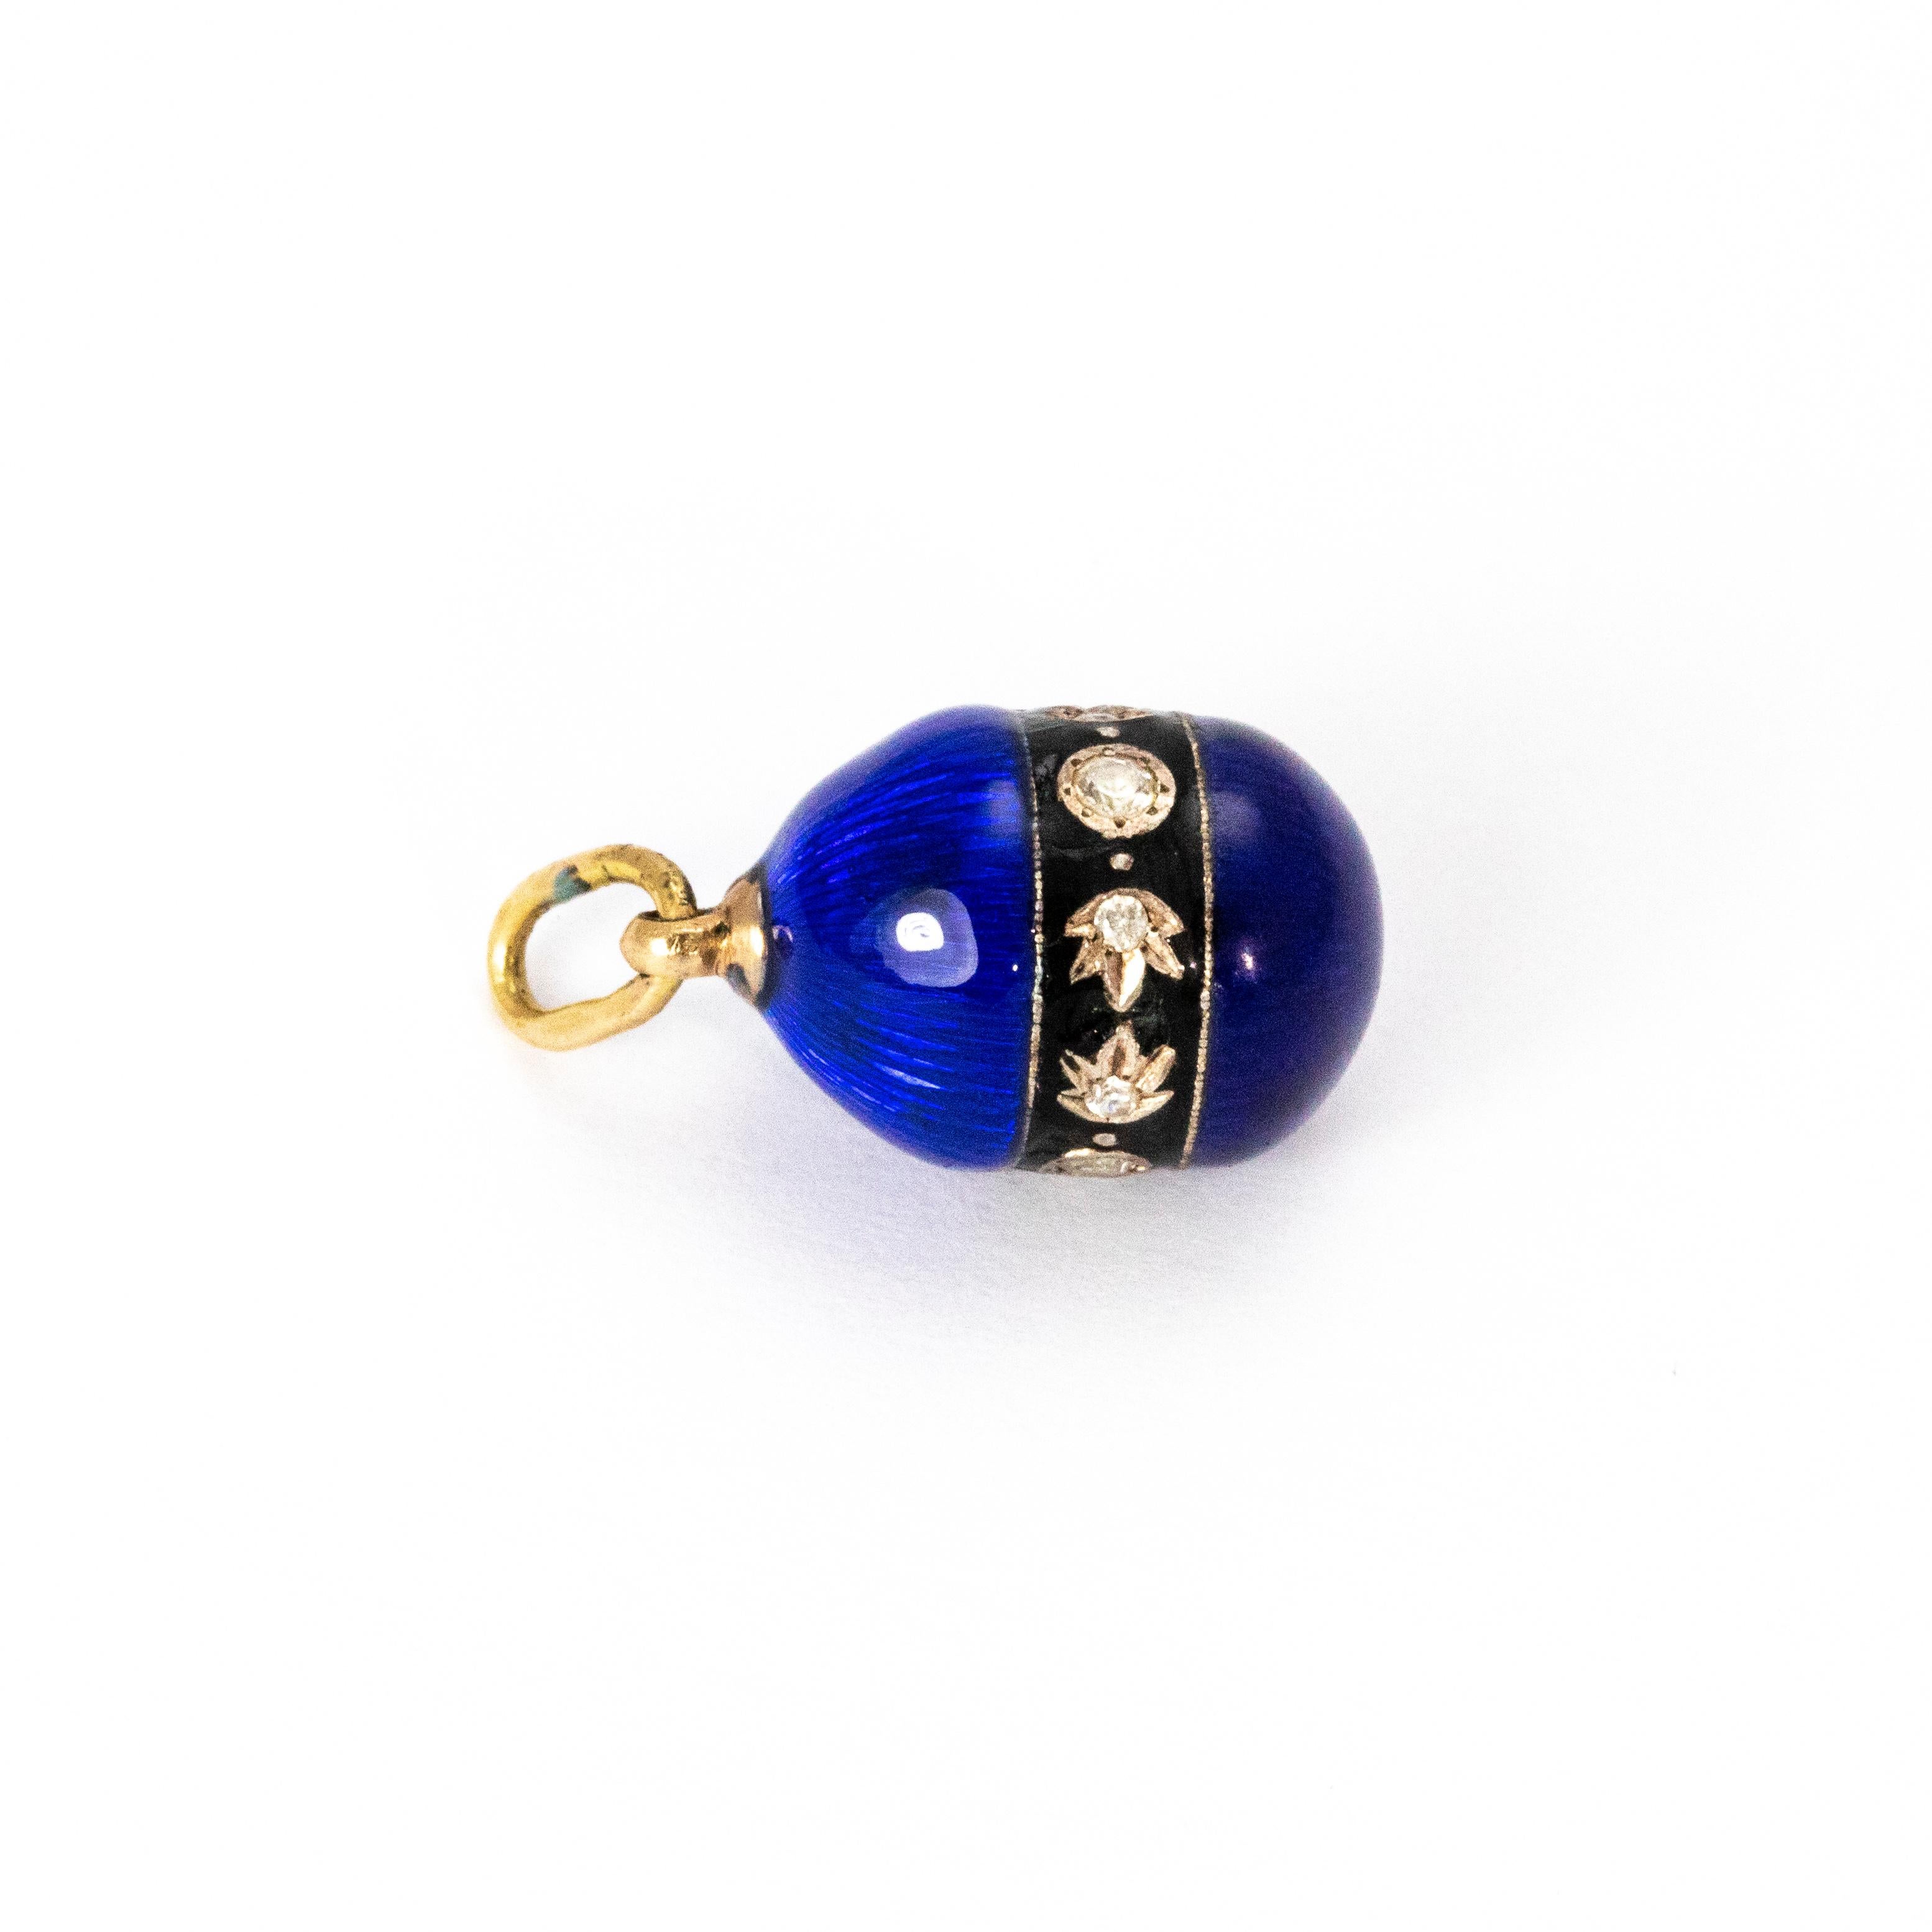 A beautiful Victorian royal blue enamel egg set with a 14 karat yellow gold loop, likely crafted in continental Europe.

Length: 20mm